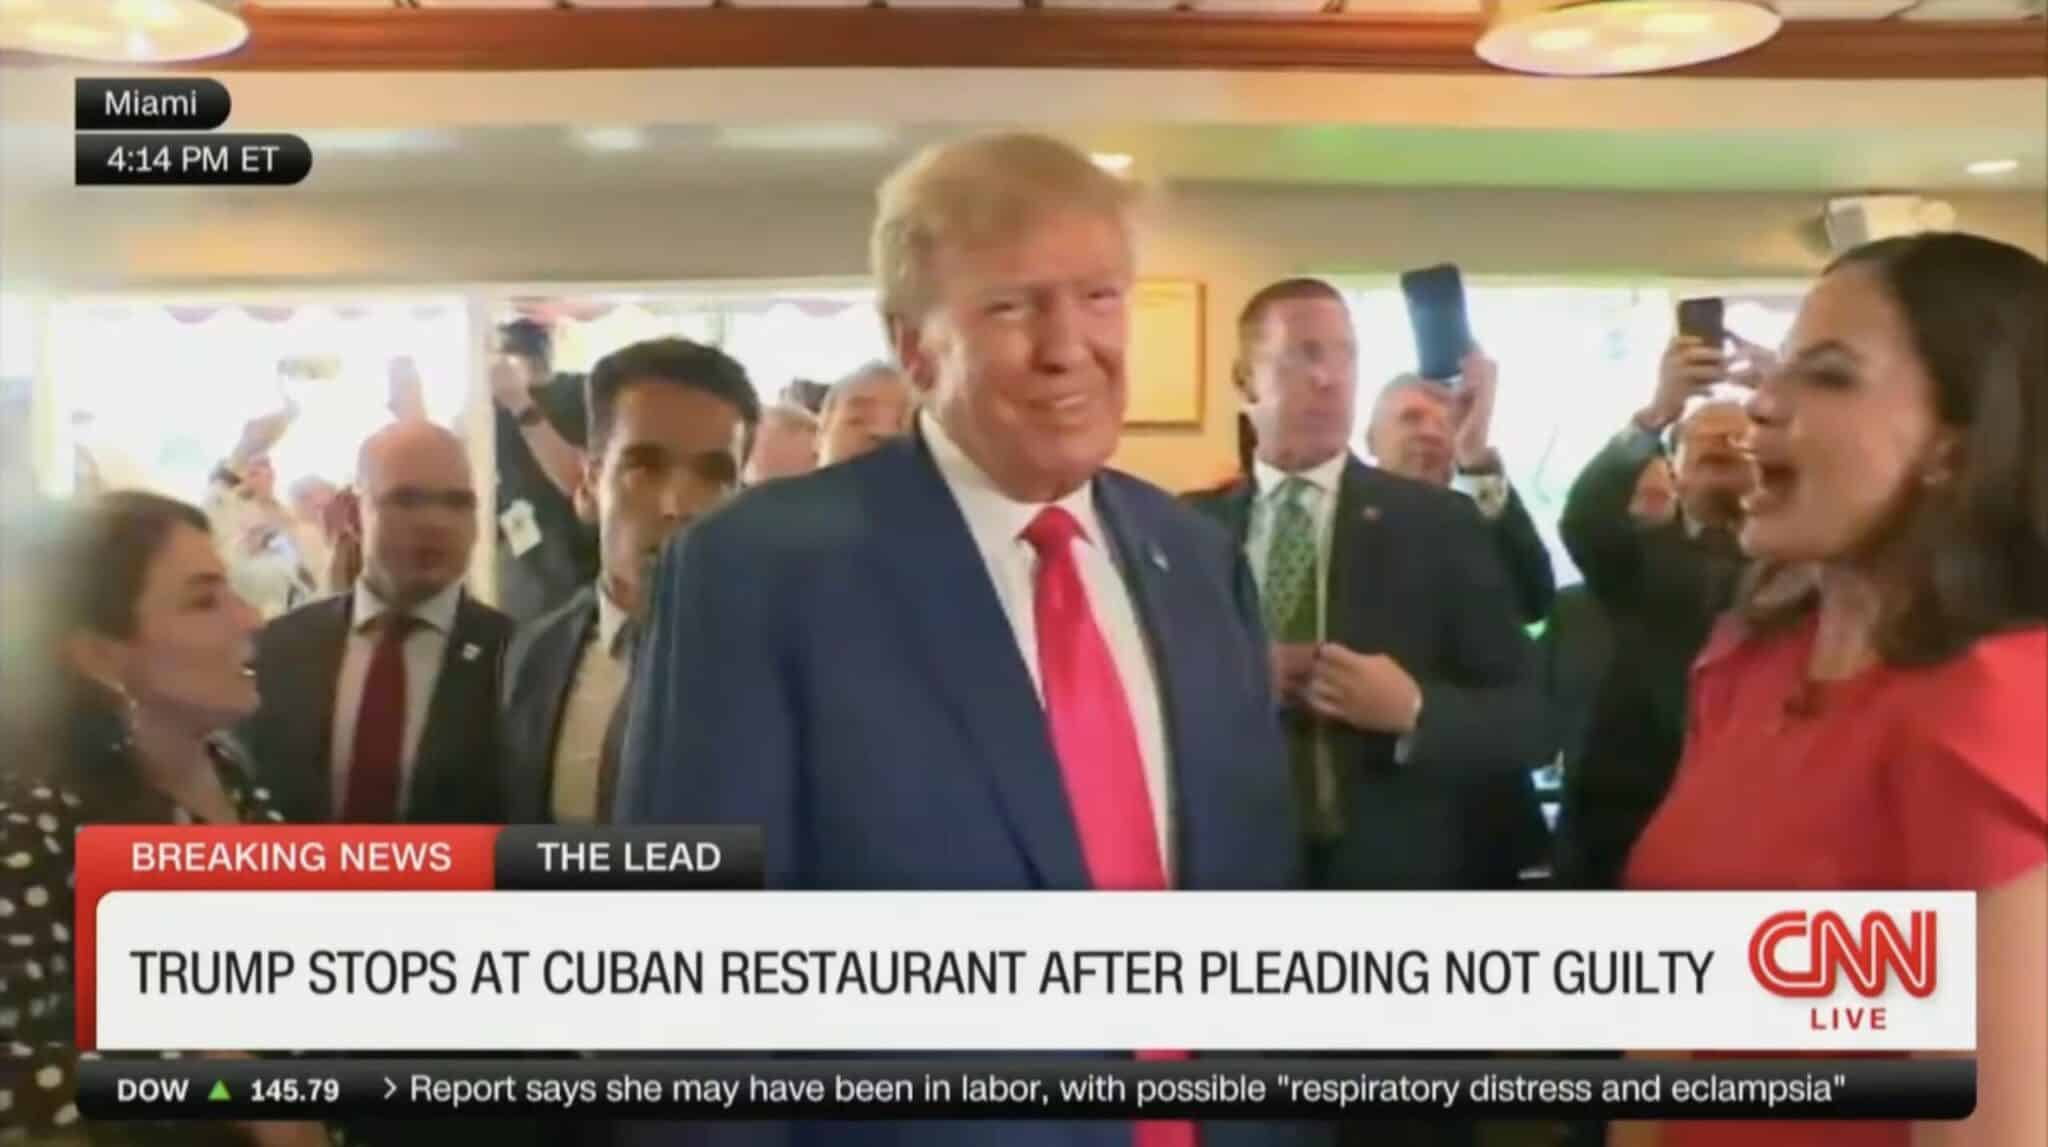 Trump Reportedly Left Restaurant Without Paying Any Bills After Telling His Supporters ‘Food For Everyone!’